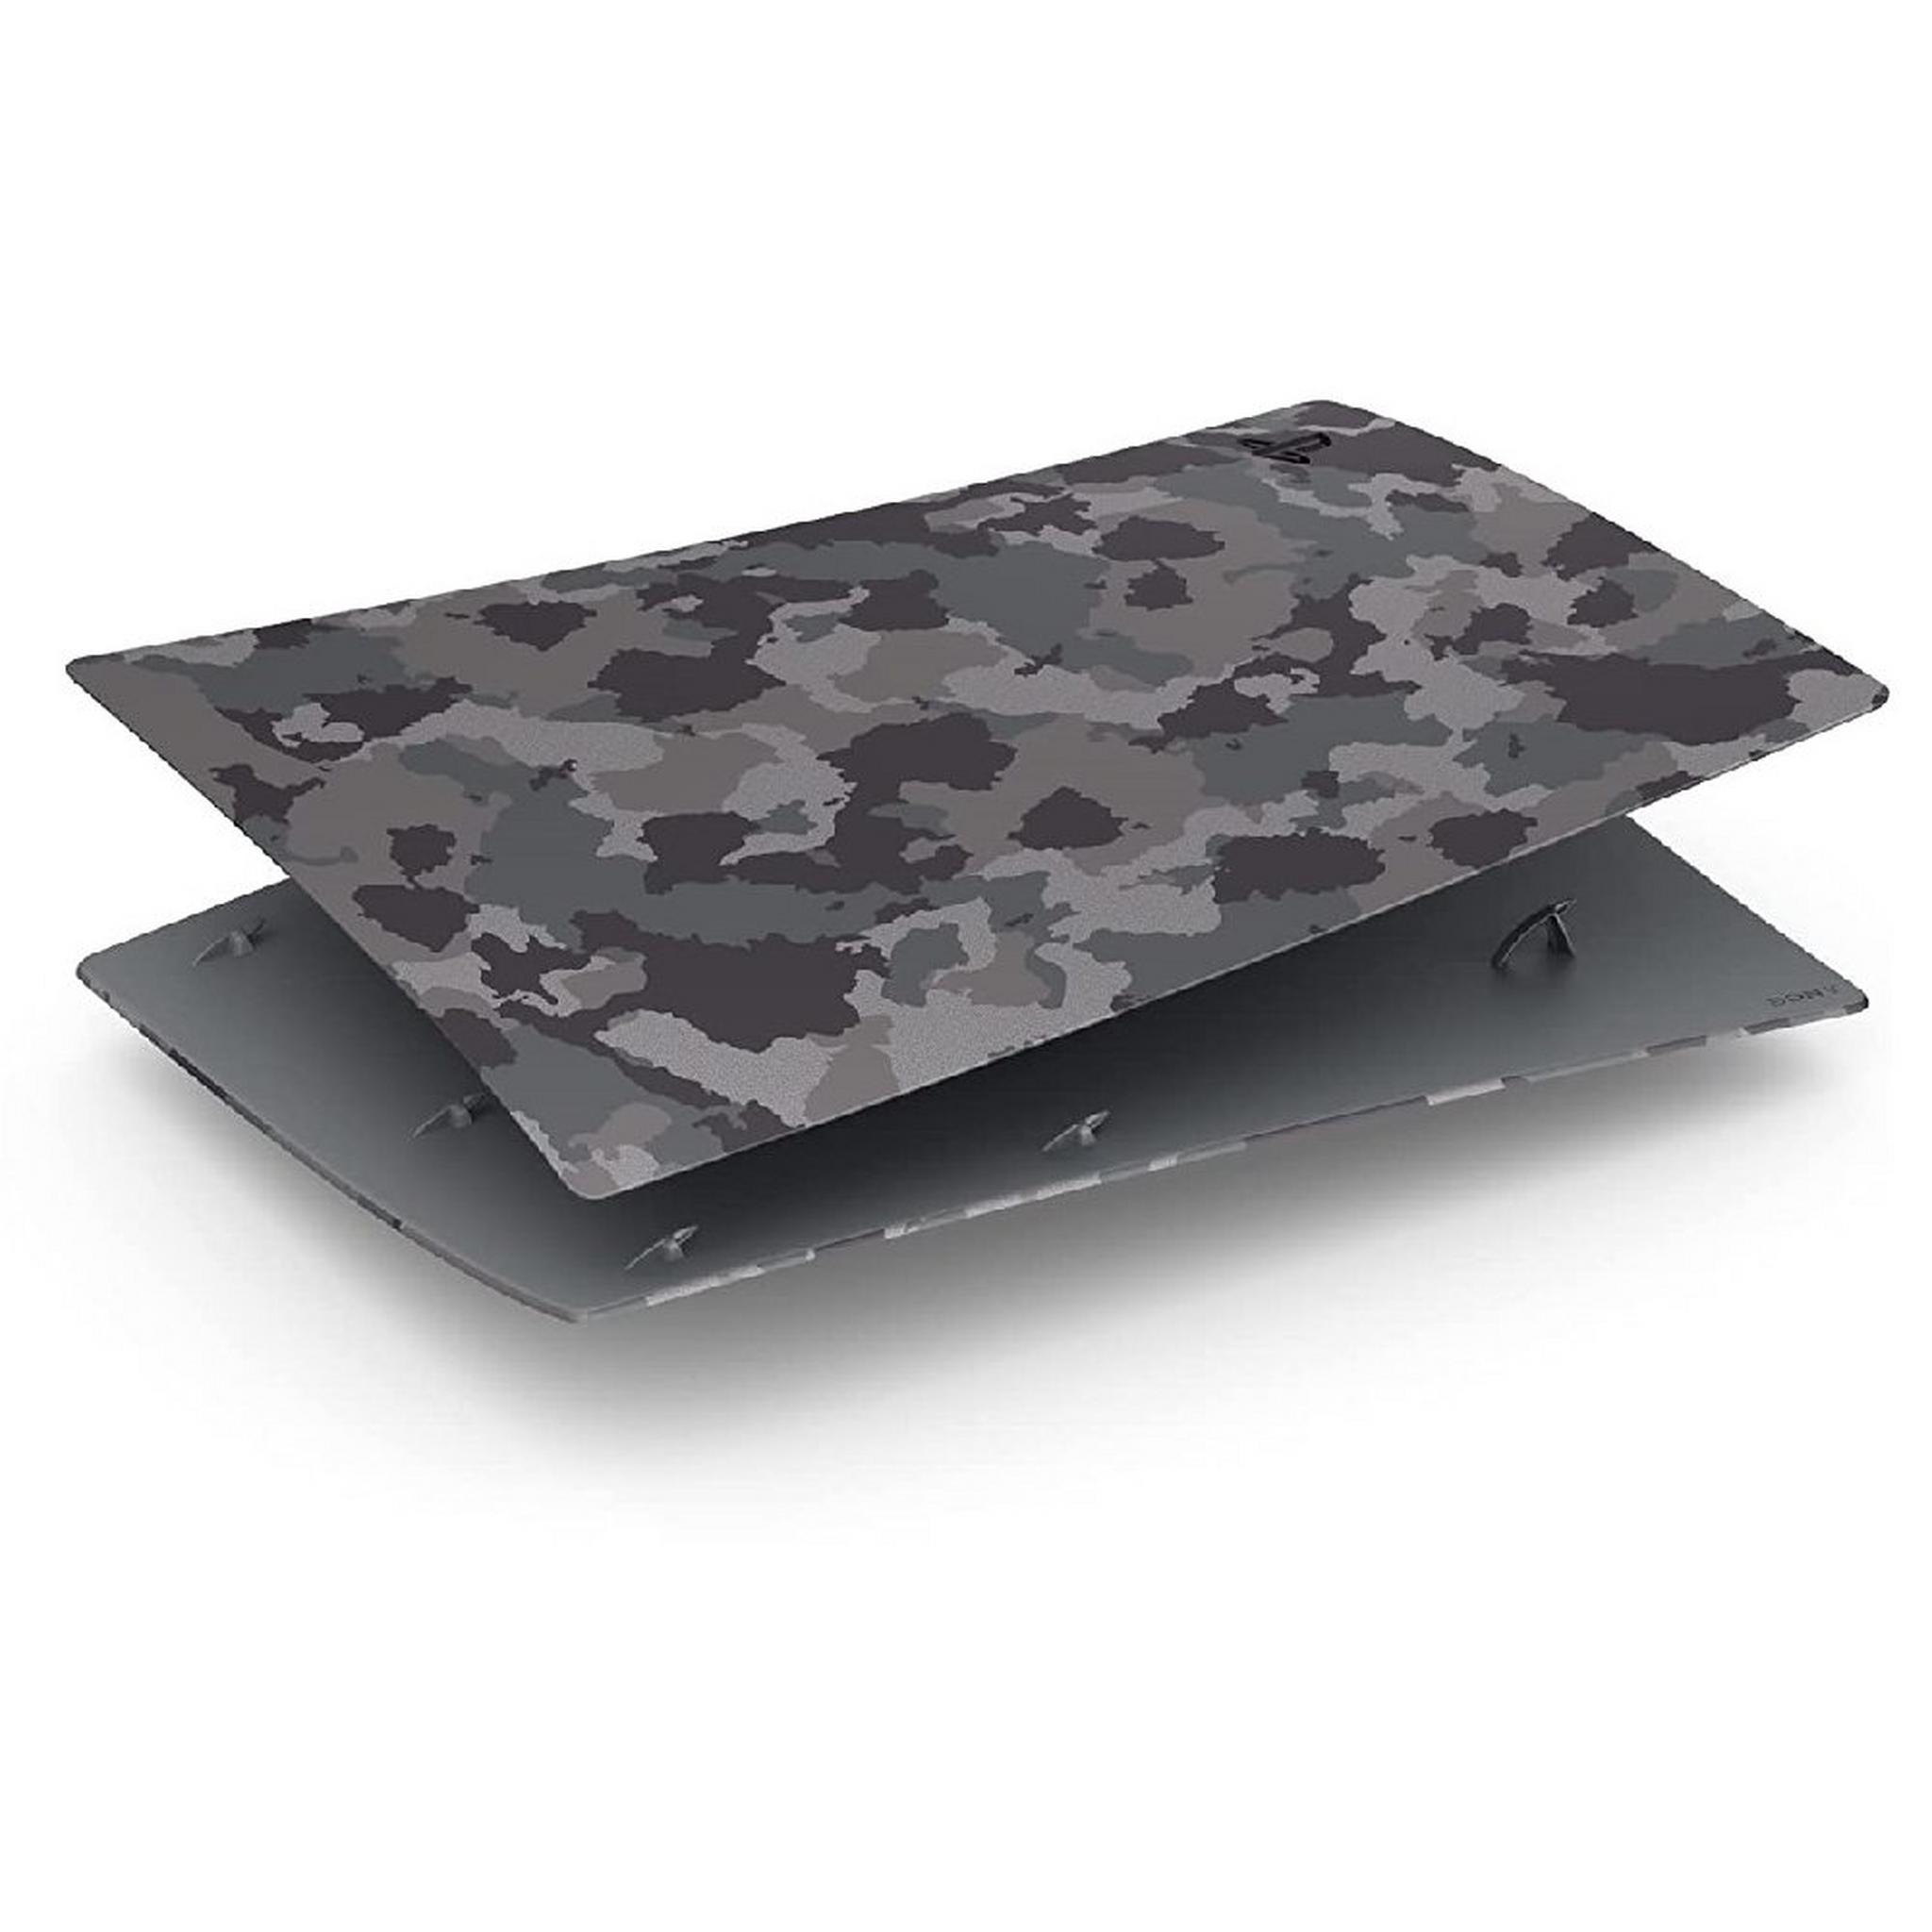 PS5™ Digital Console Covers - Gray Camouflage